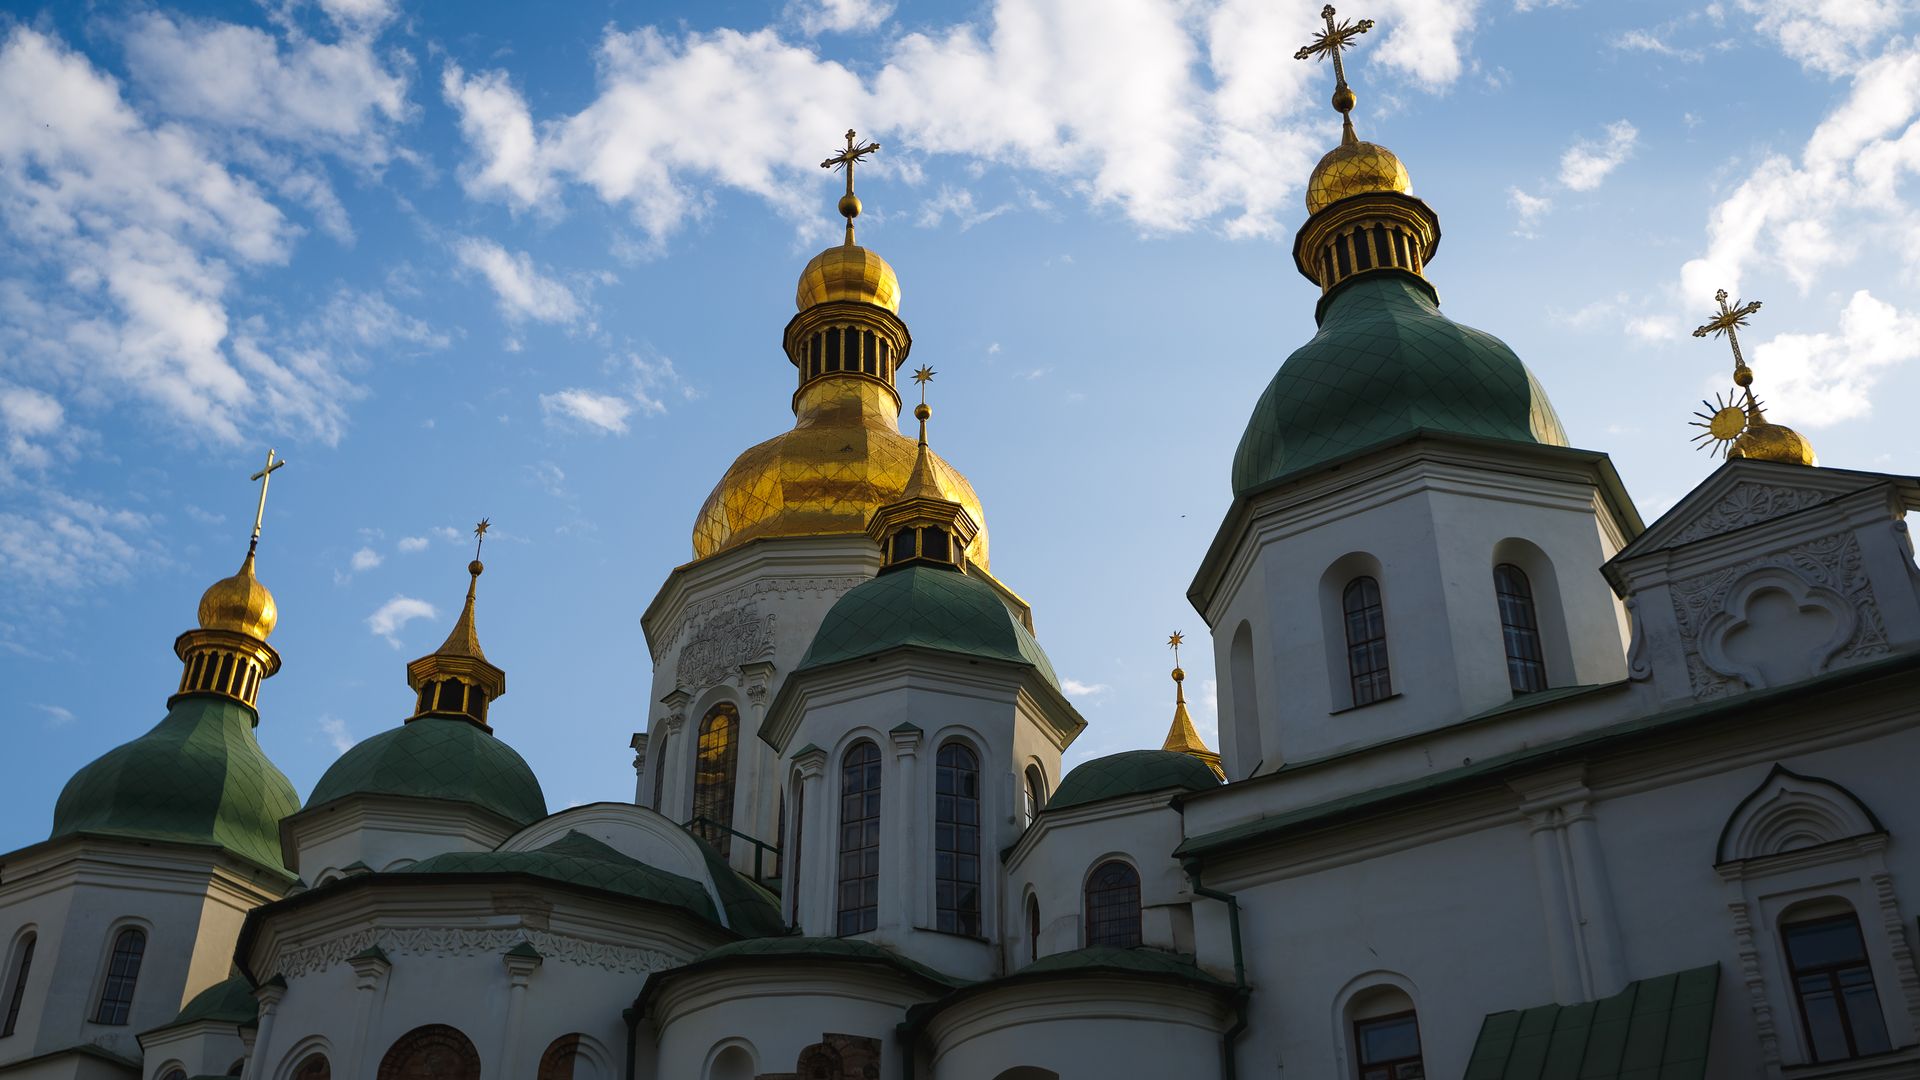 Saint Sophia Cathedral, one of the endangered sites, in Kyiv, Ukraine, in August 2022.